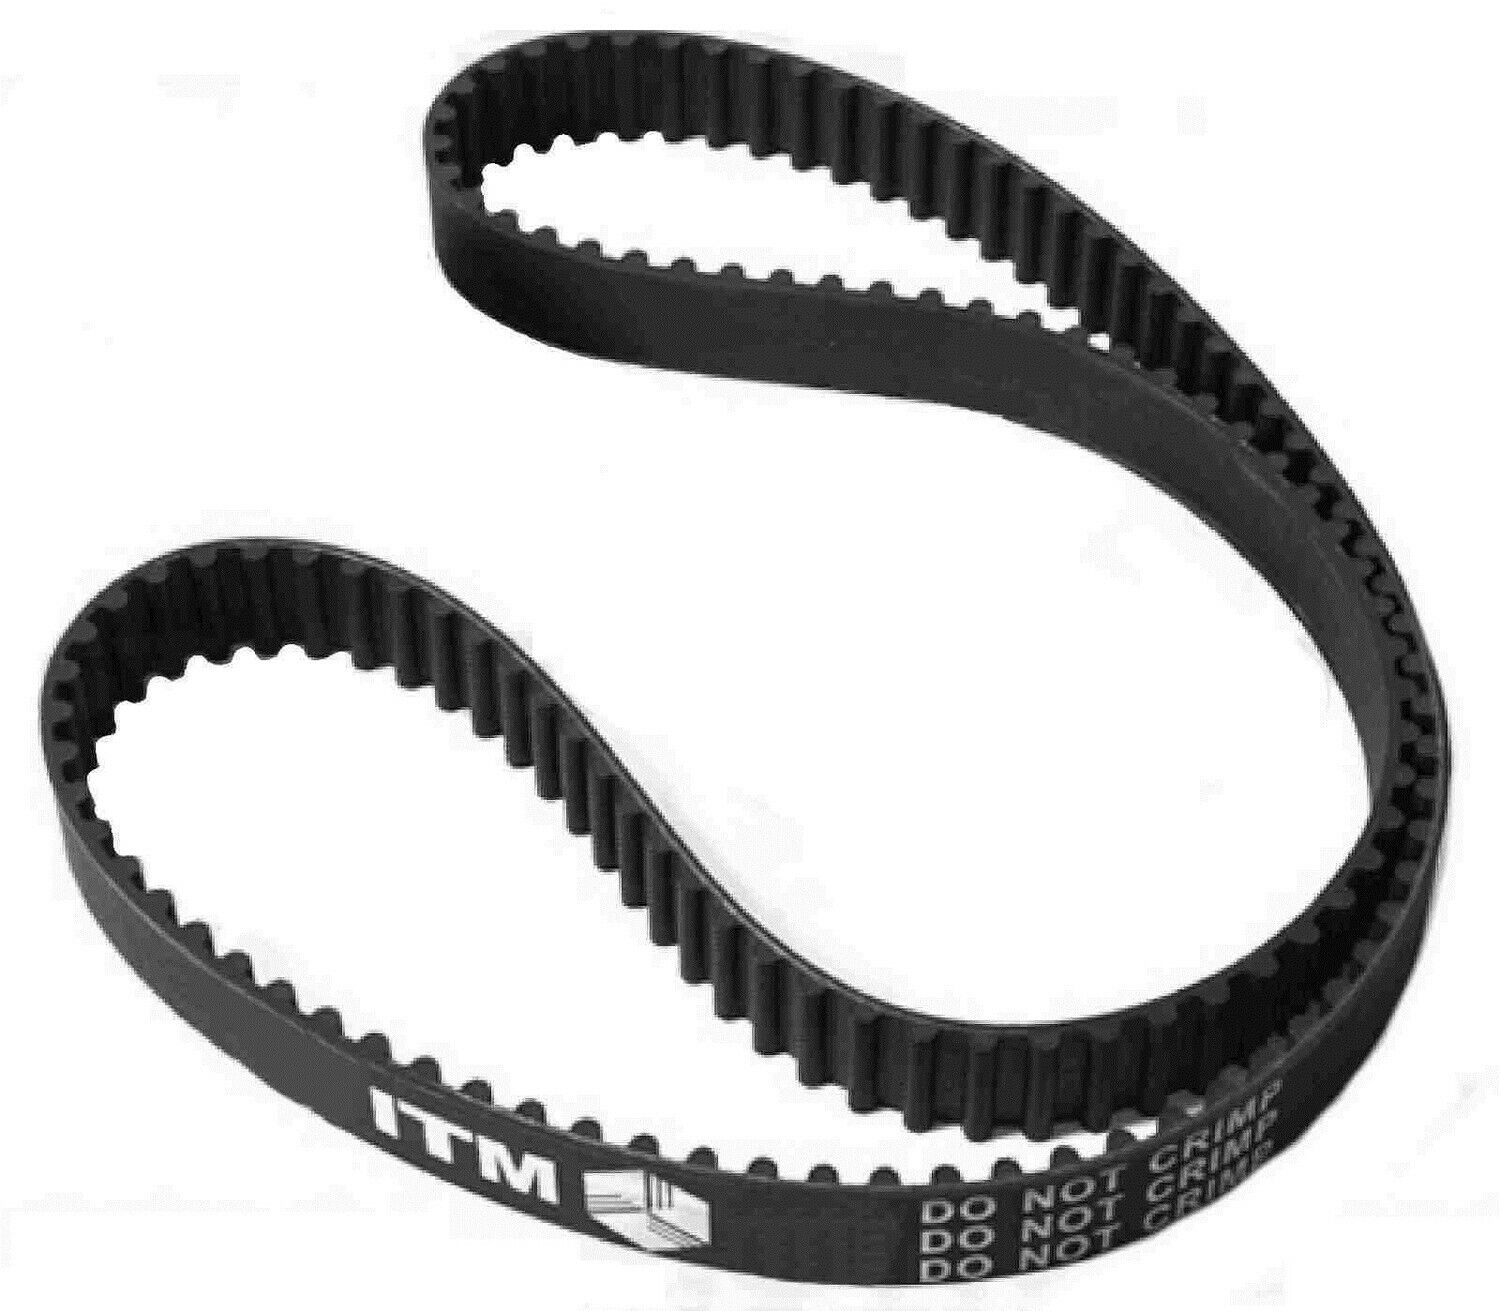 Max 51% OFF Engine Free shipping New Timing Belt-DLX 4070 ITM